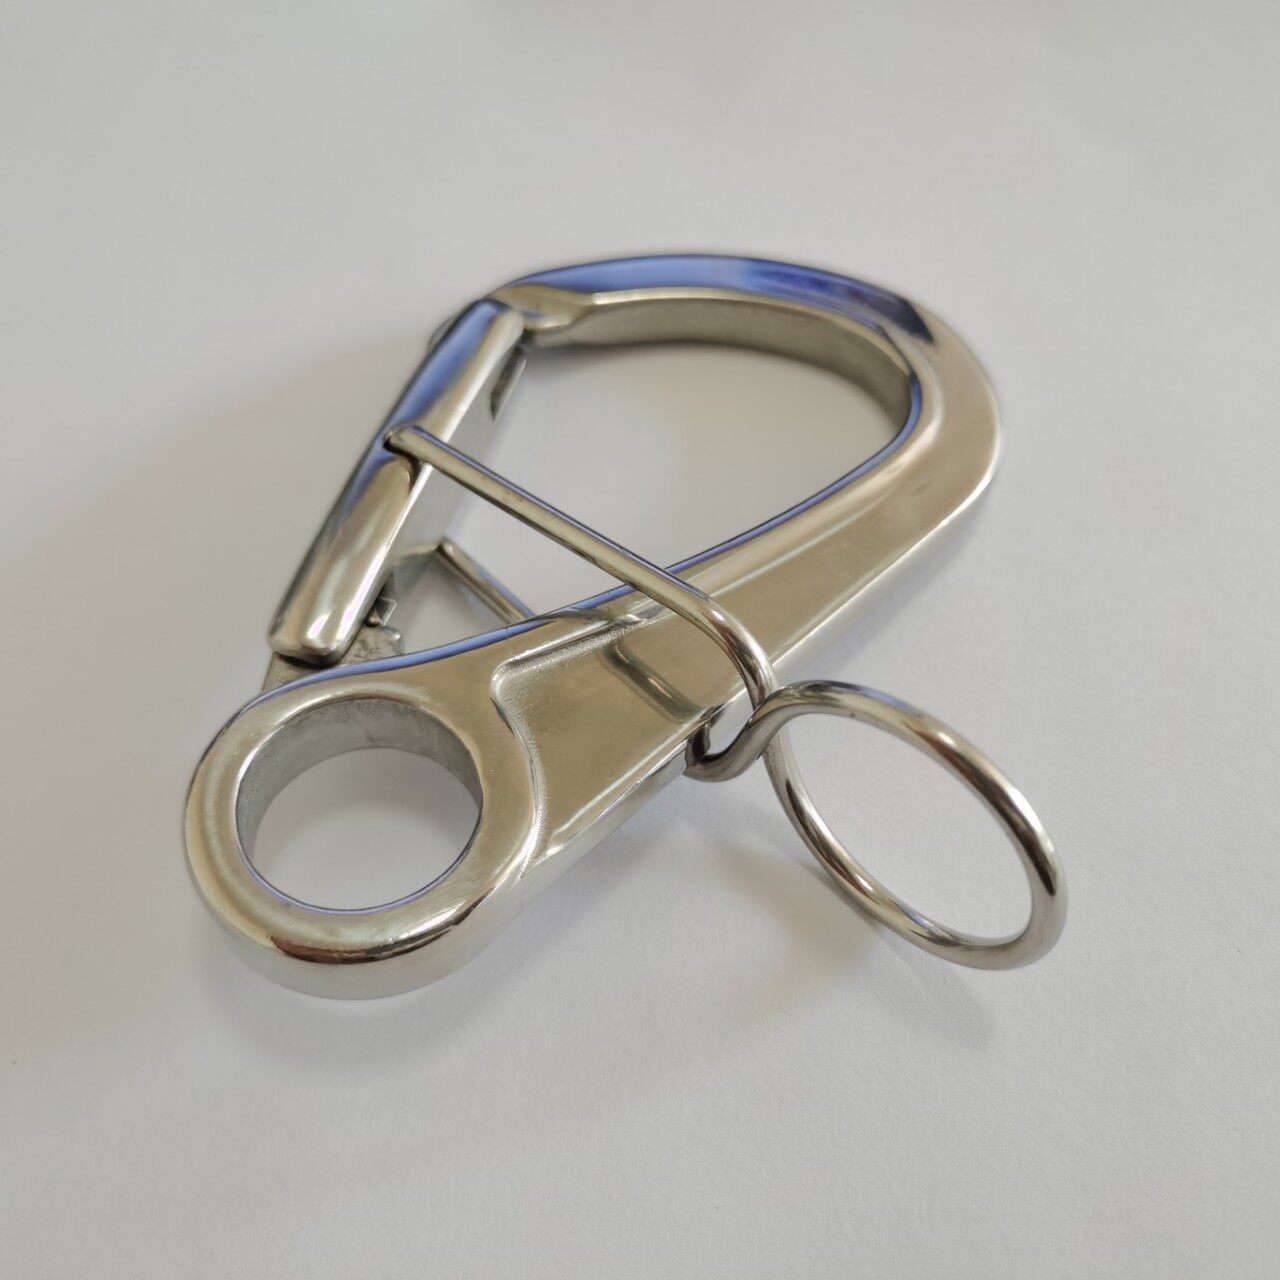 Stainless steel 316 safety hook double safety hook